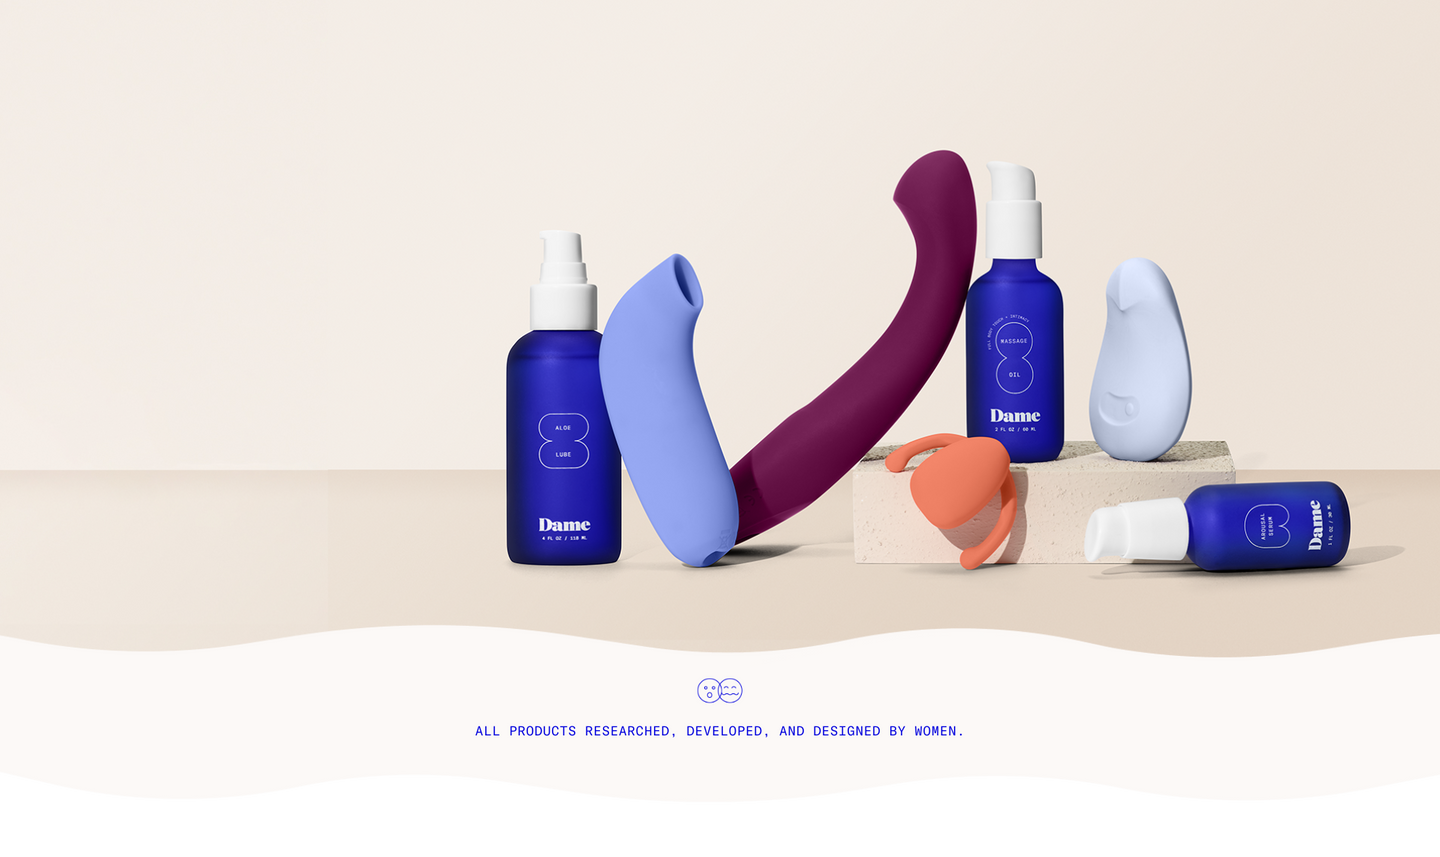 Display of a variety of Dame products (vibrators, massage oils) on a neutral background.